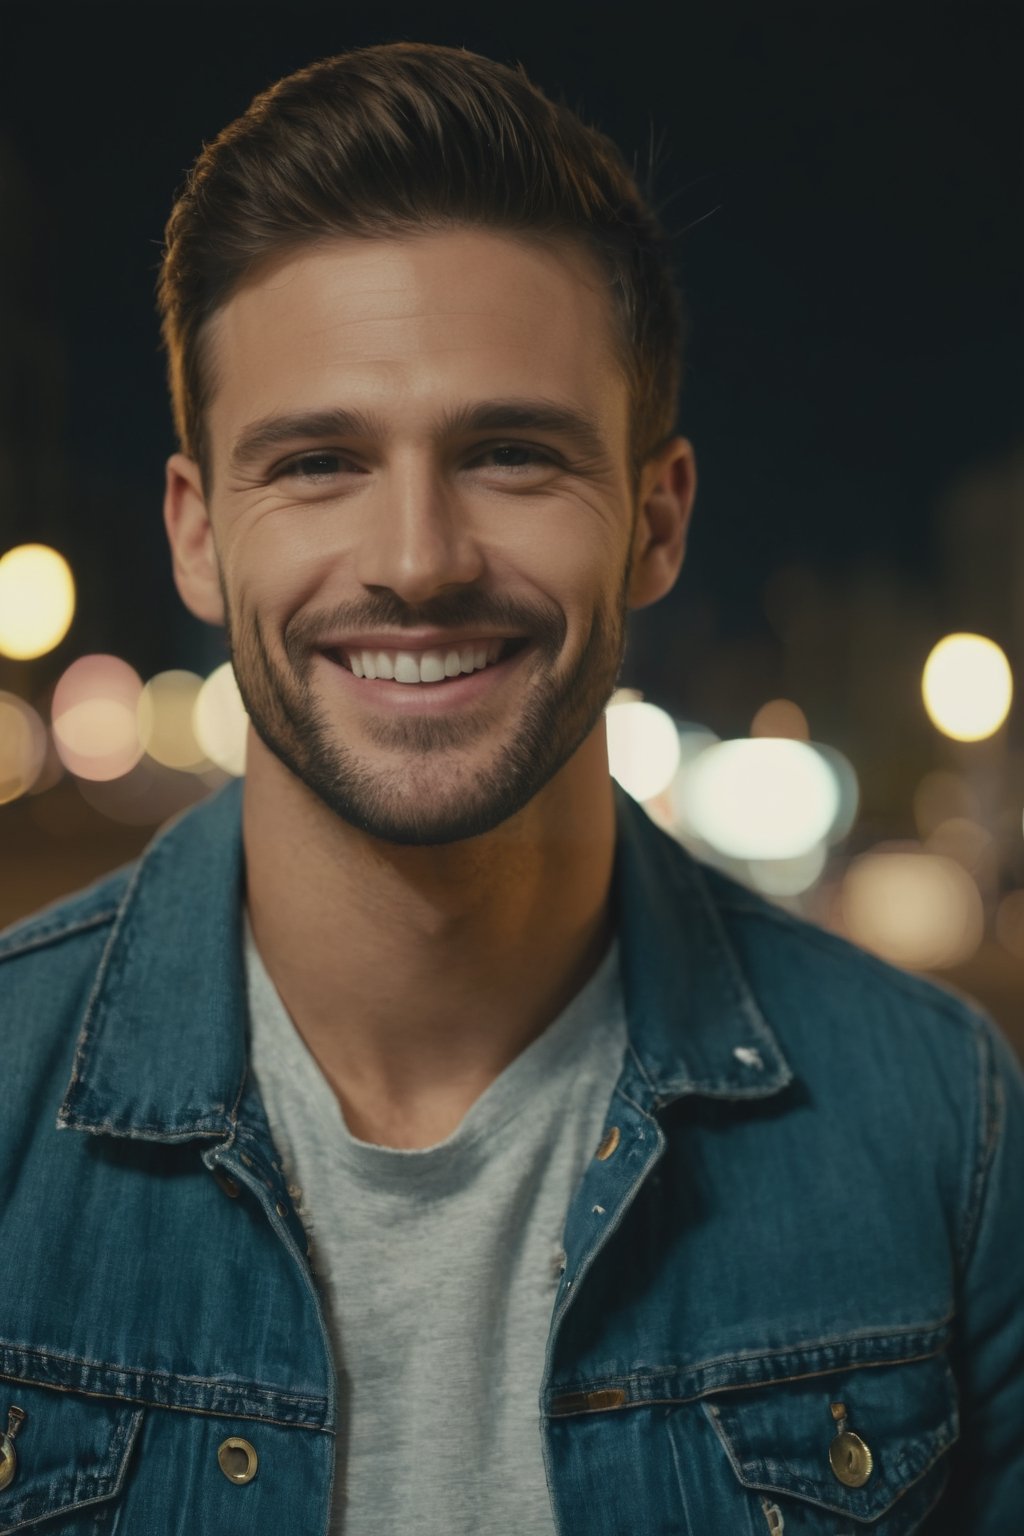 Close up photo of a smiling handsome man Name Chris ] wearing a jean jacket and t-shirt in the city at night, high details 4K